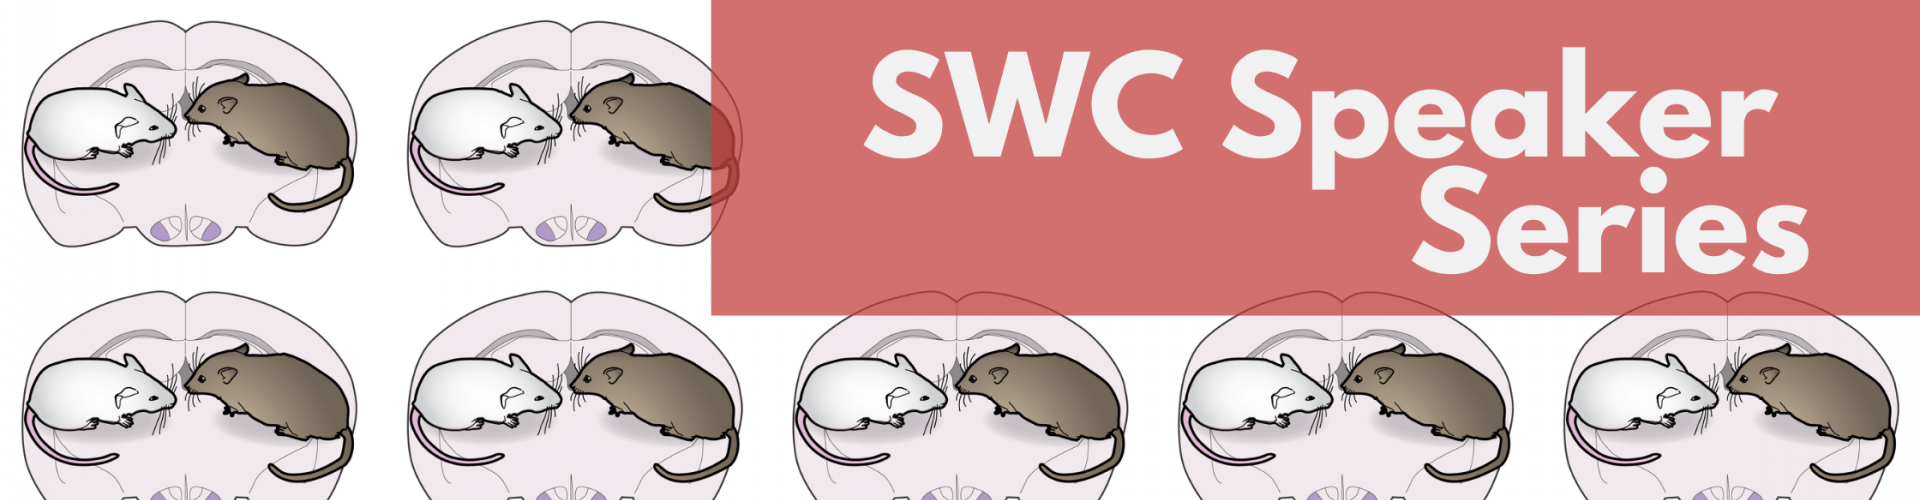 Illustration of brains and two rodents with text overlaid "SWC Speaker Series"